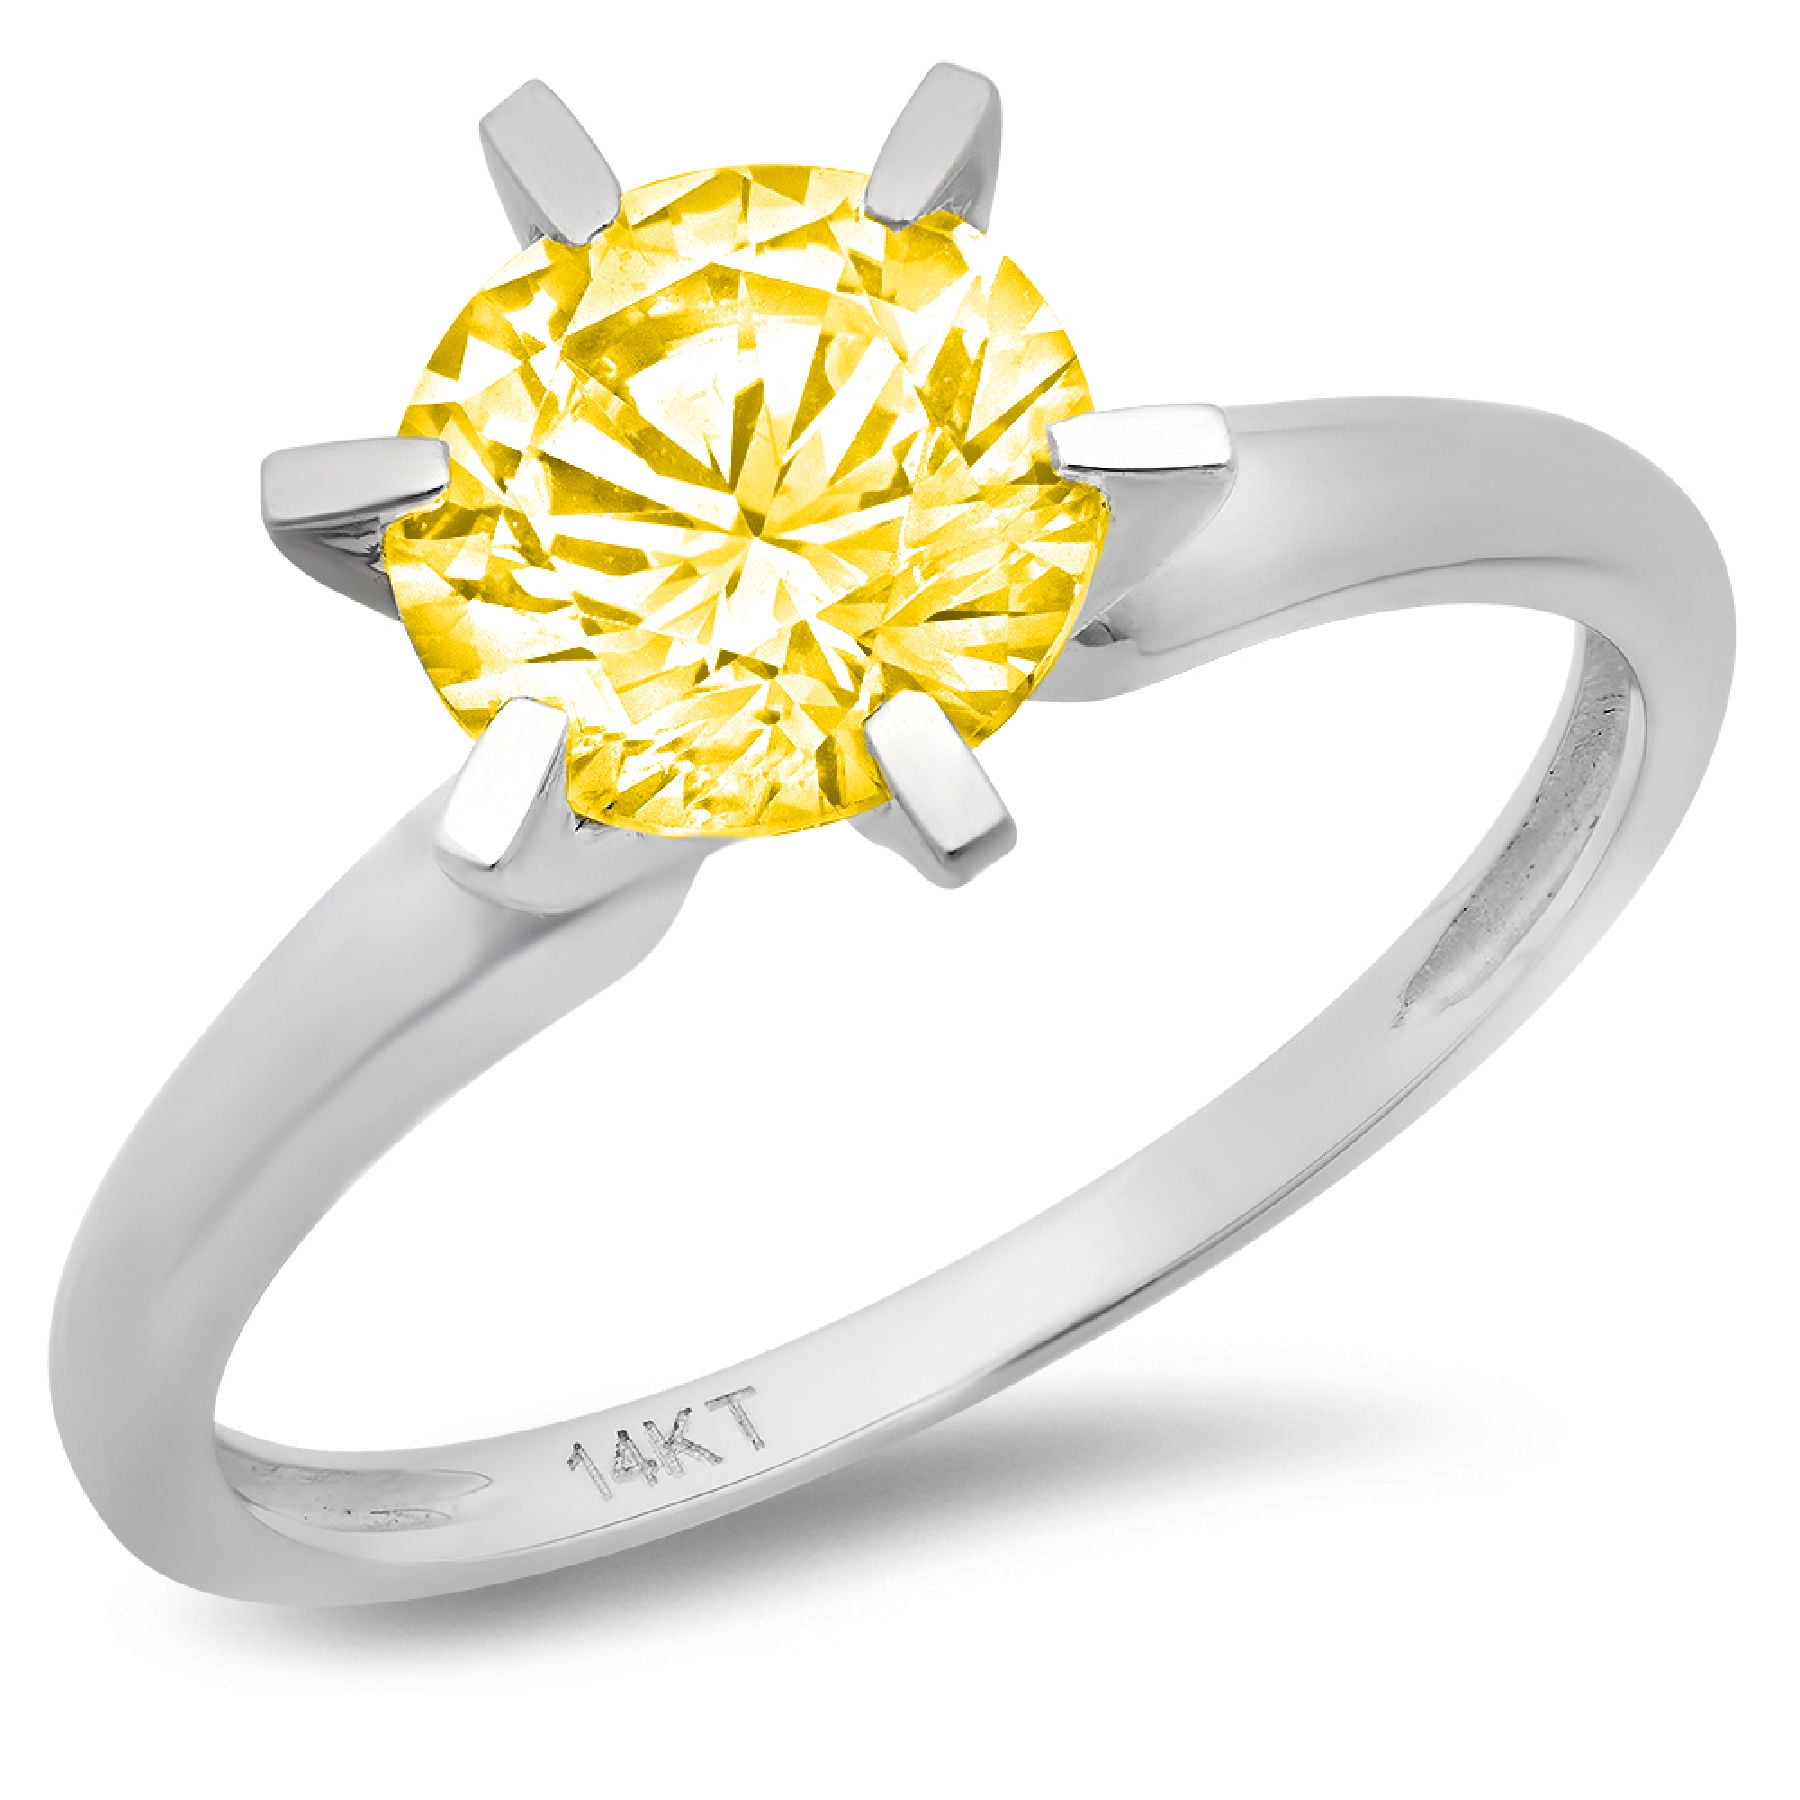 Details about   3Ct Round Cut Simulant Diamond 3 Stone Engagement Ring Yellow Gold Finish Silver